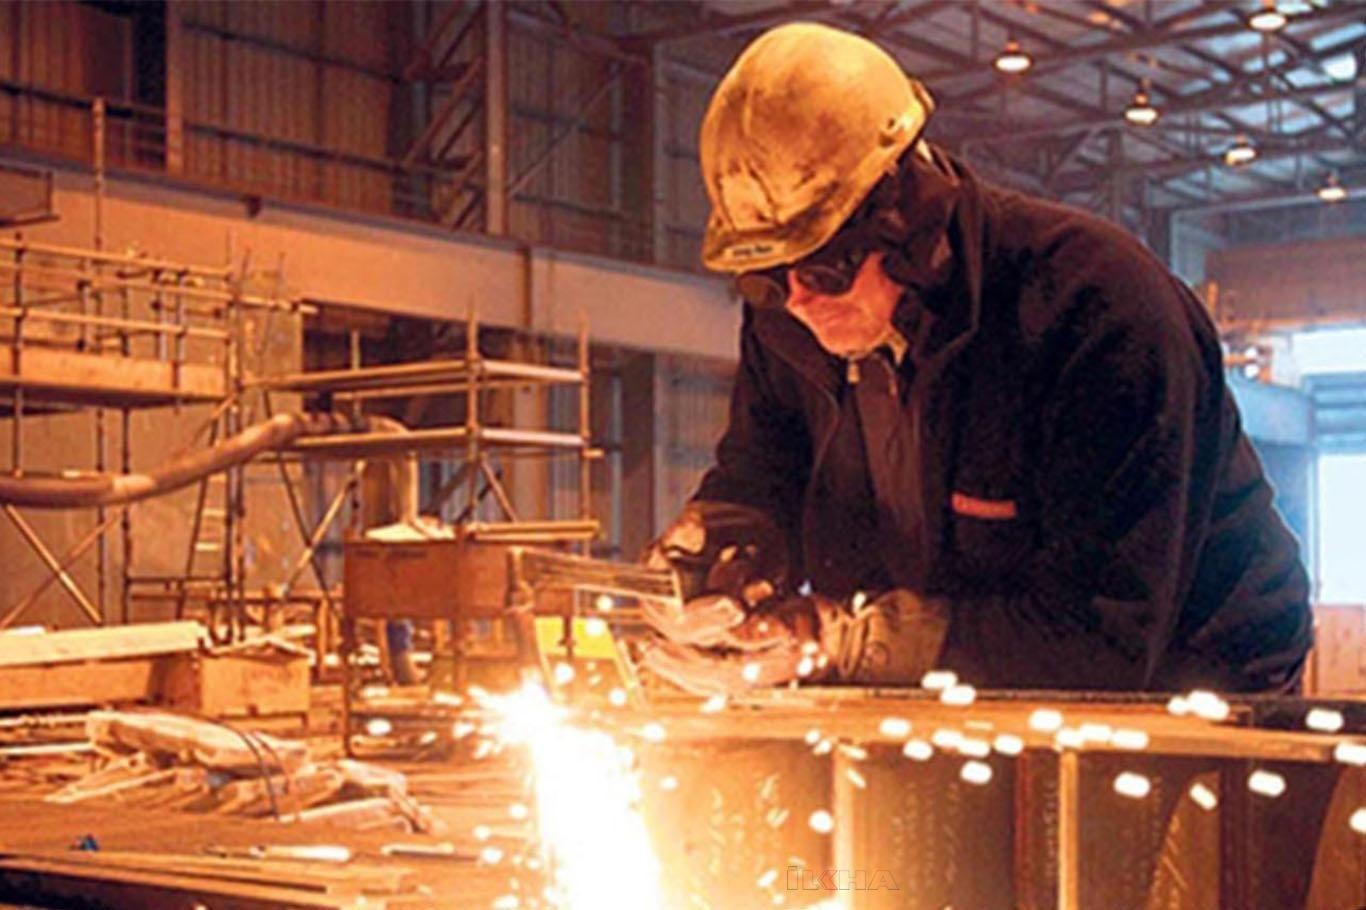 Turkey’s industrial production decreases by 19.9% annually